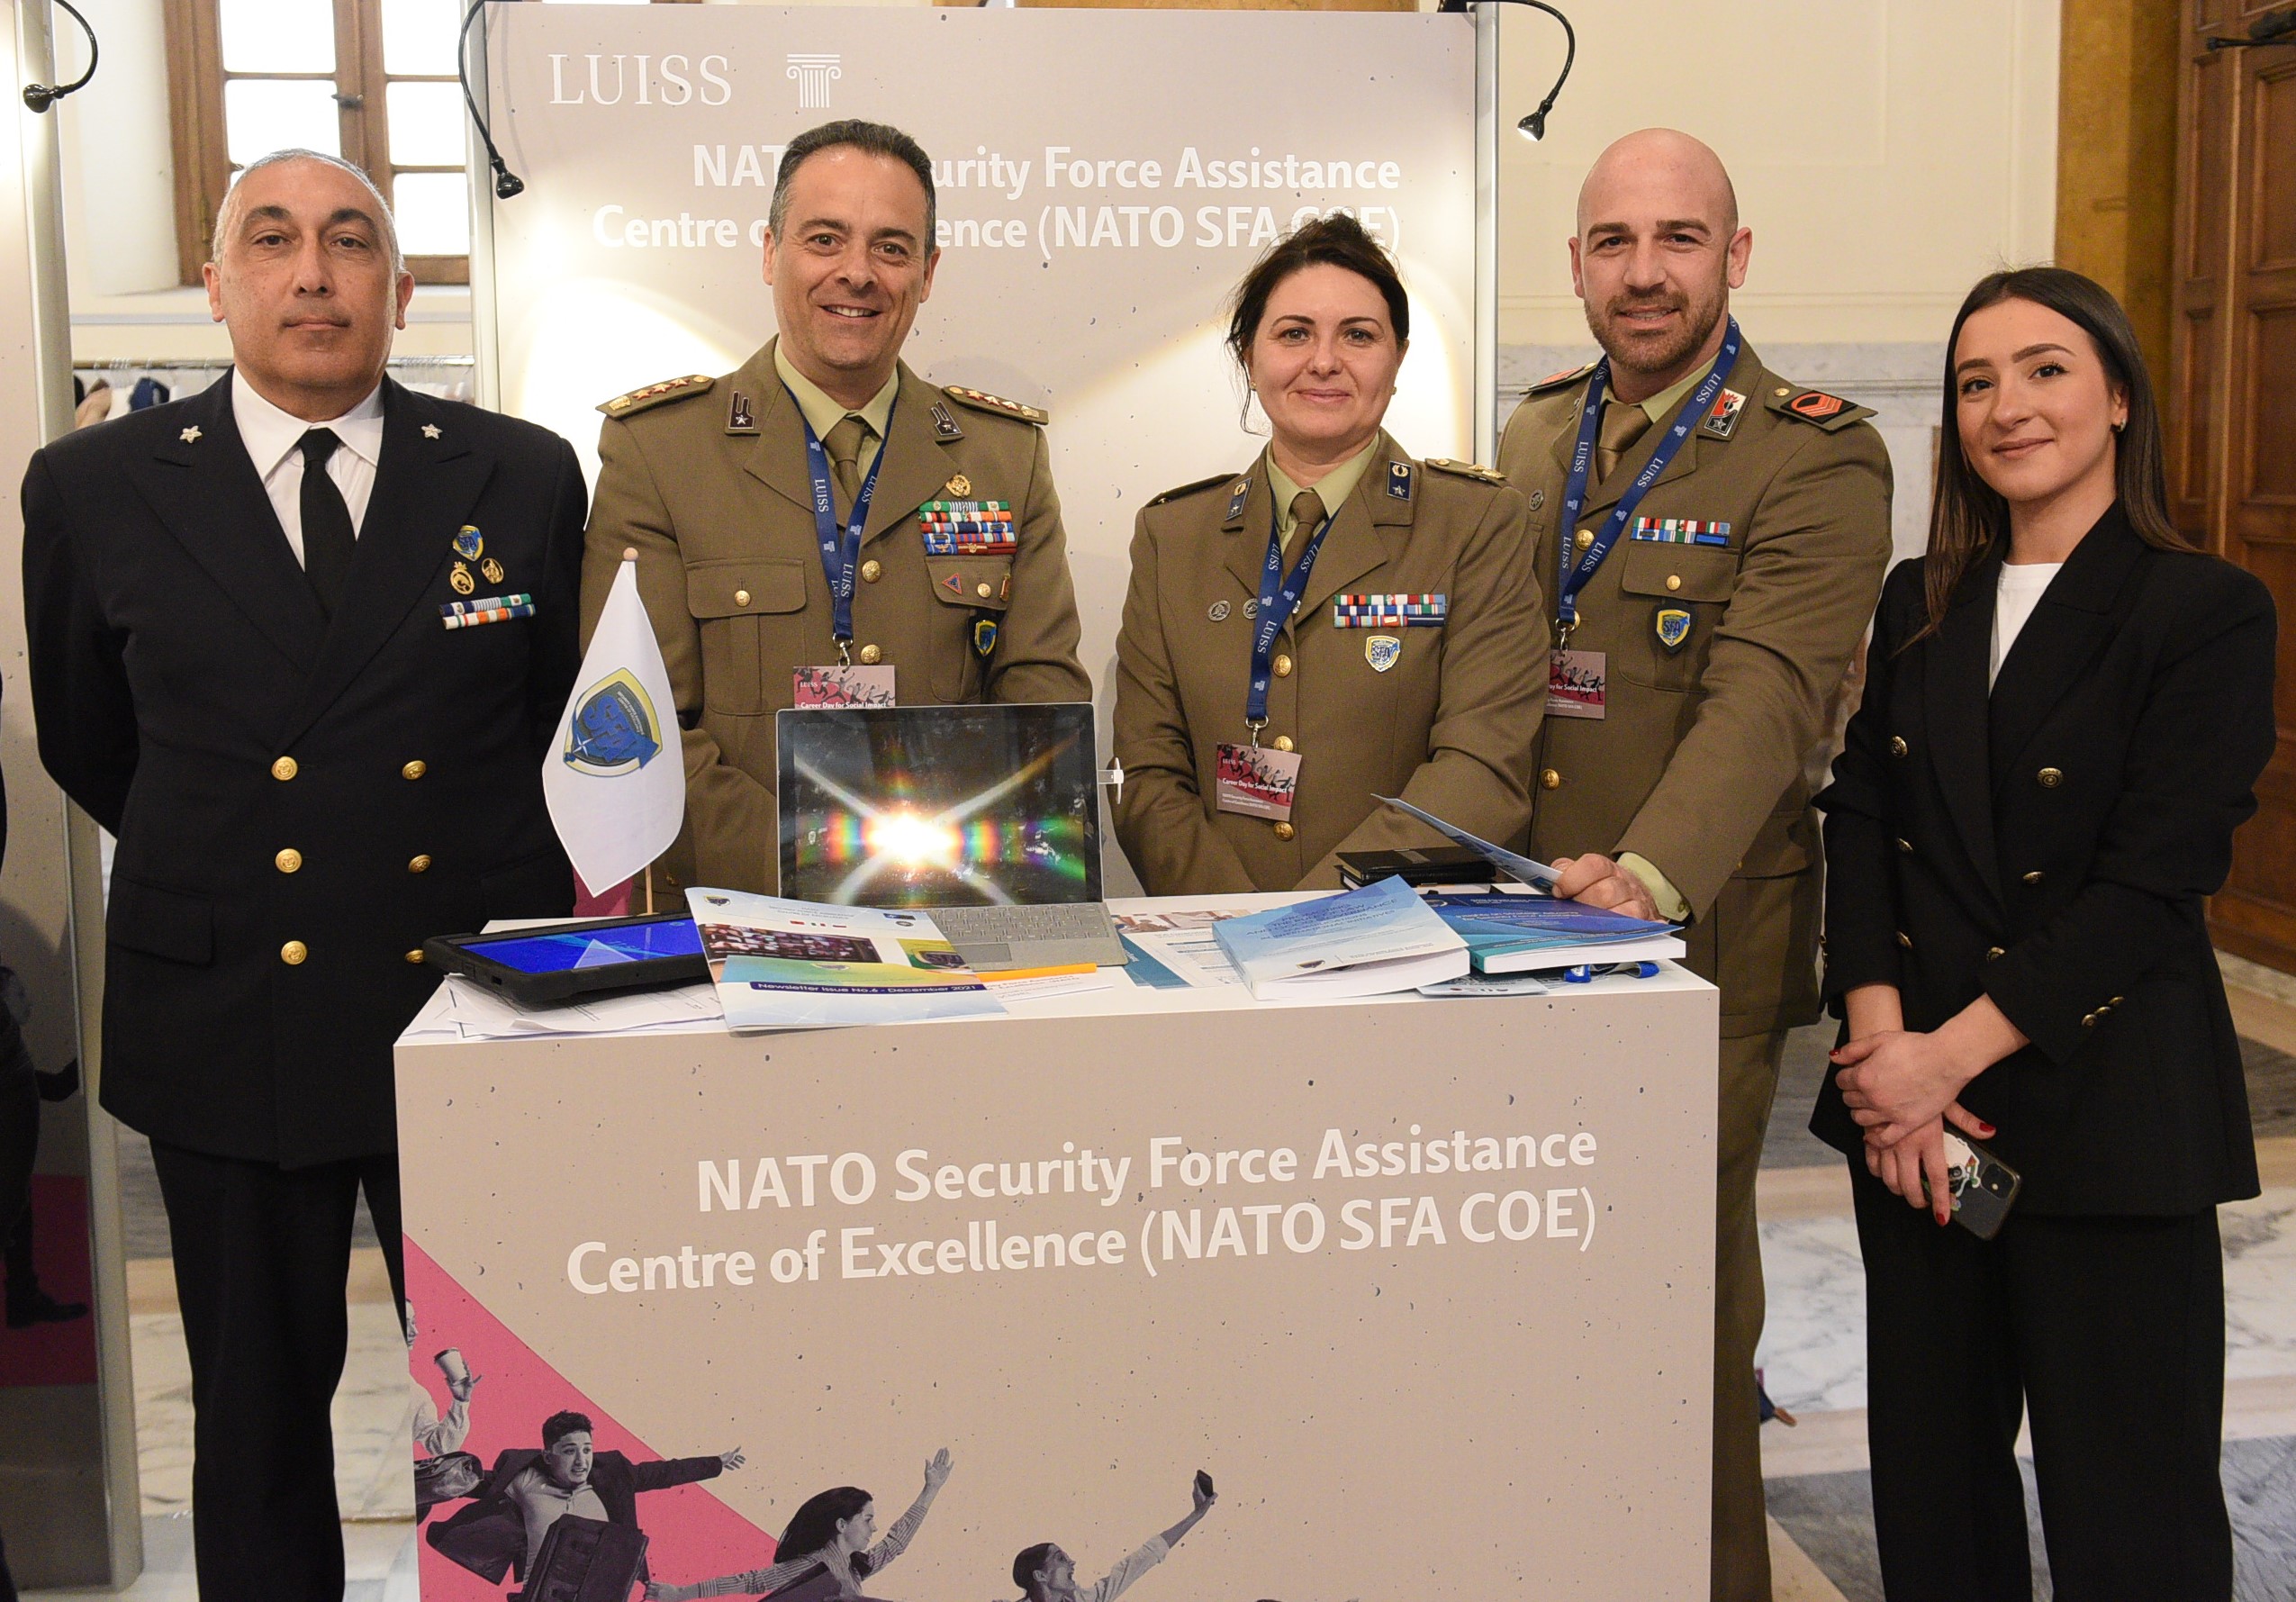 NATO SFA COE participated at the Luiss’s Career Day for Social Impact